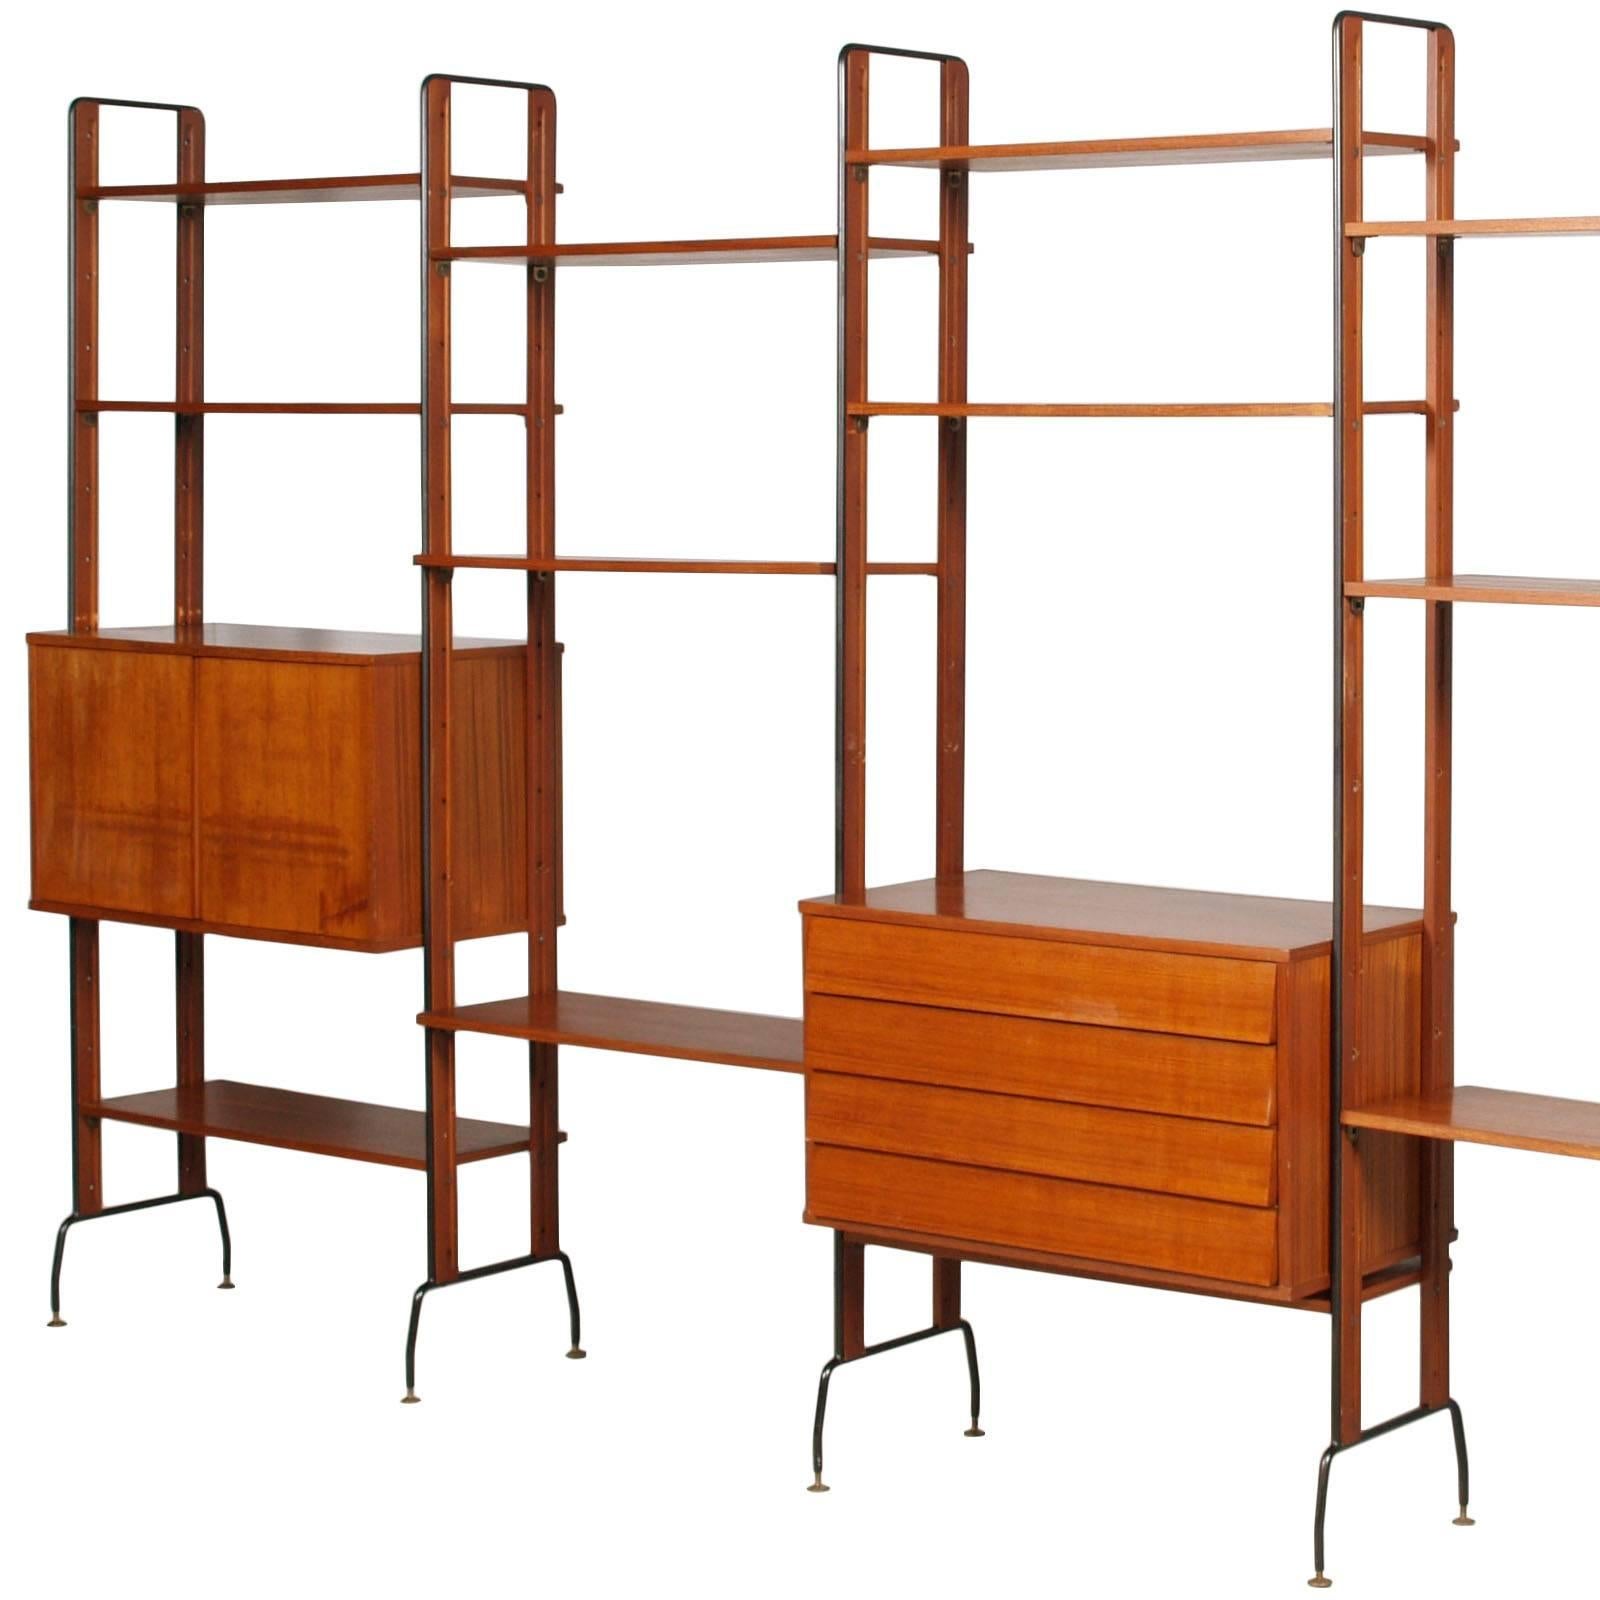 1950s number three book shelfs with storage units, La Permanente Mobili di Cantu, Franco Albini Franca Helg manner in solid teak wood, teak wood veneer of storage cabinets and structure in black lacquered steel. Adjustable brass feet and brass